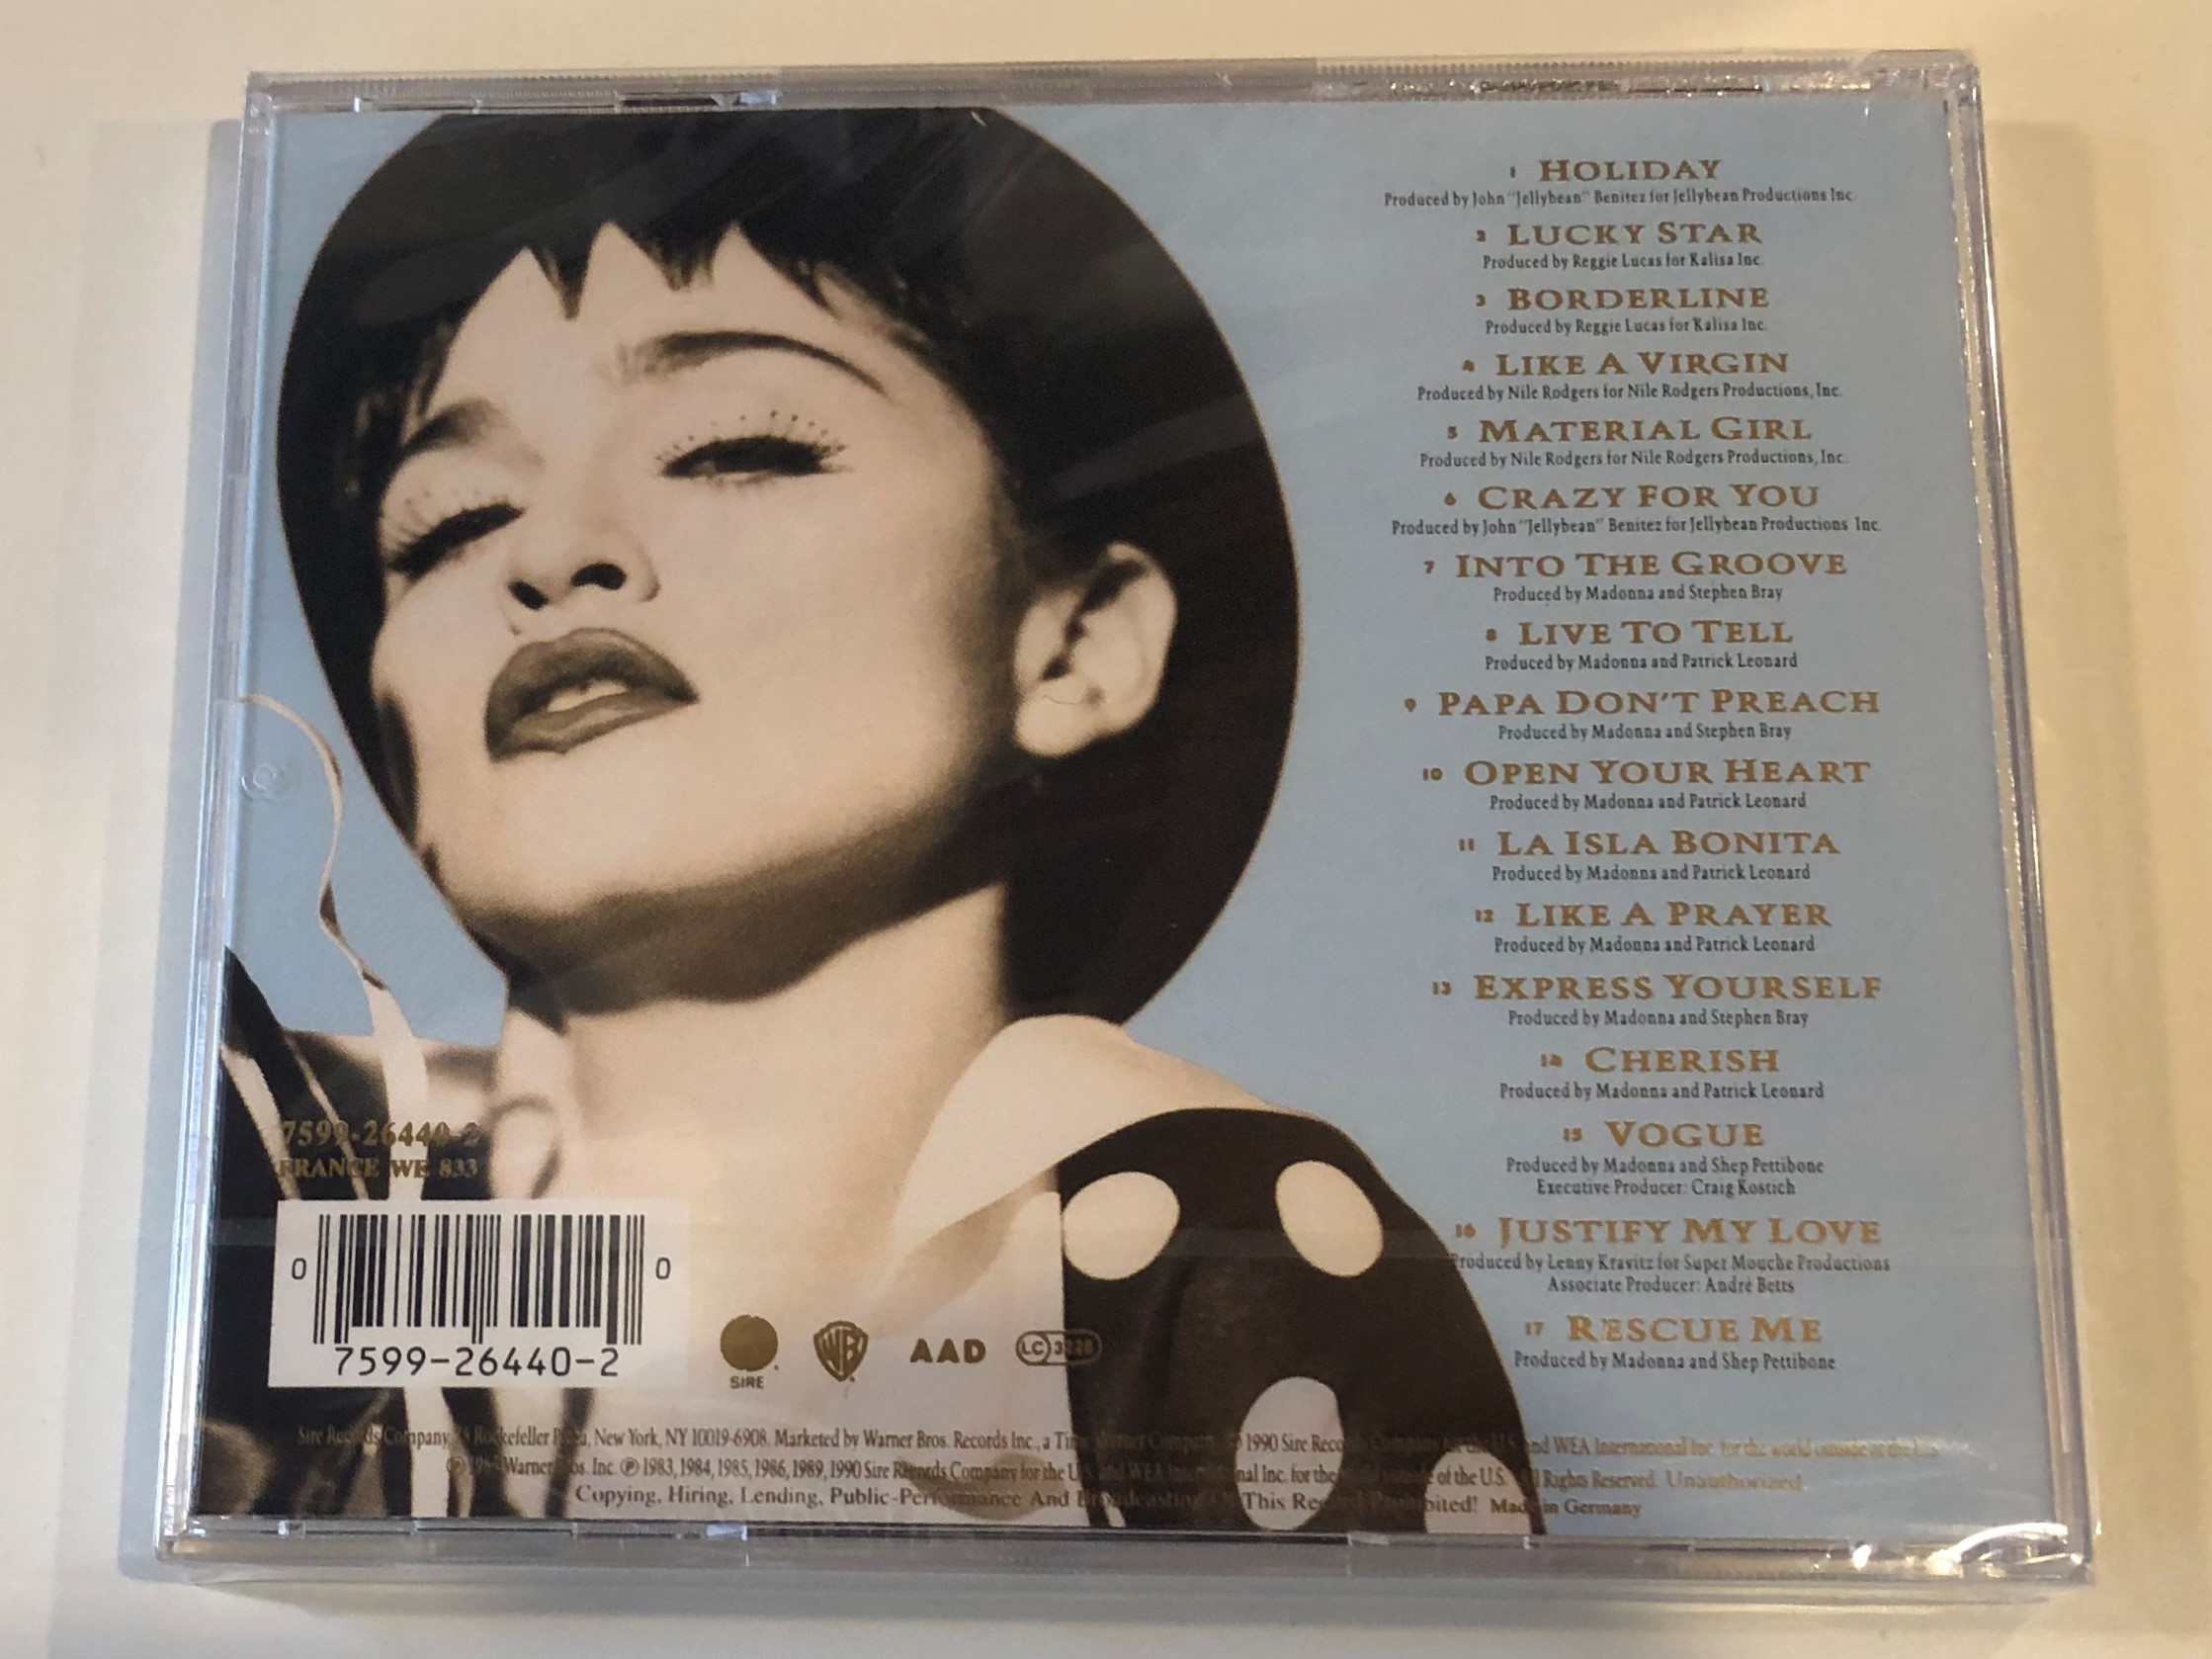 the-immaculate-collection-madonna-warner-bros.-records-audio-cd-7599-26440-2-2-.jpg